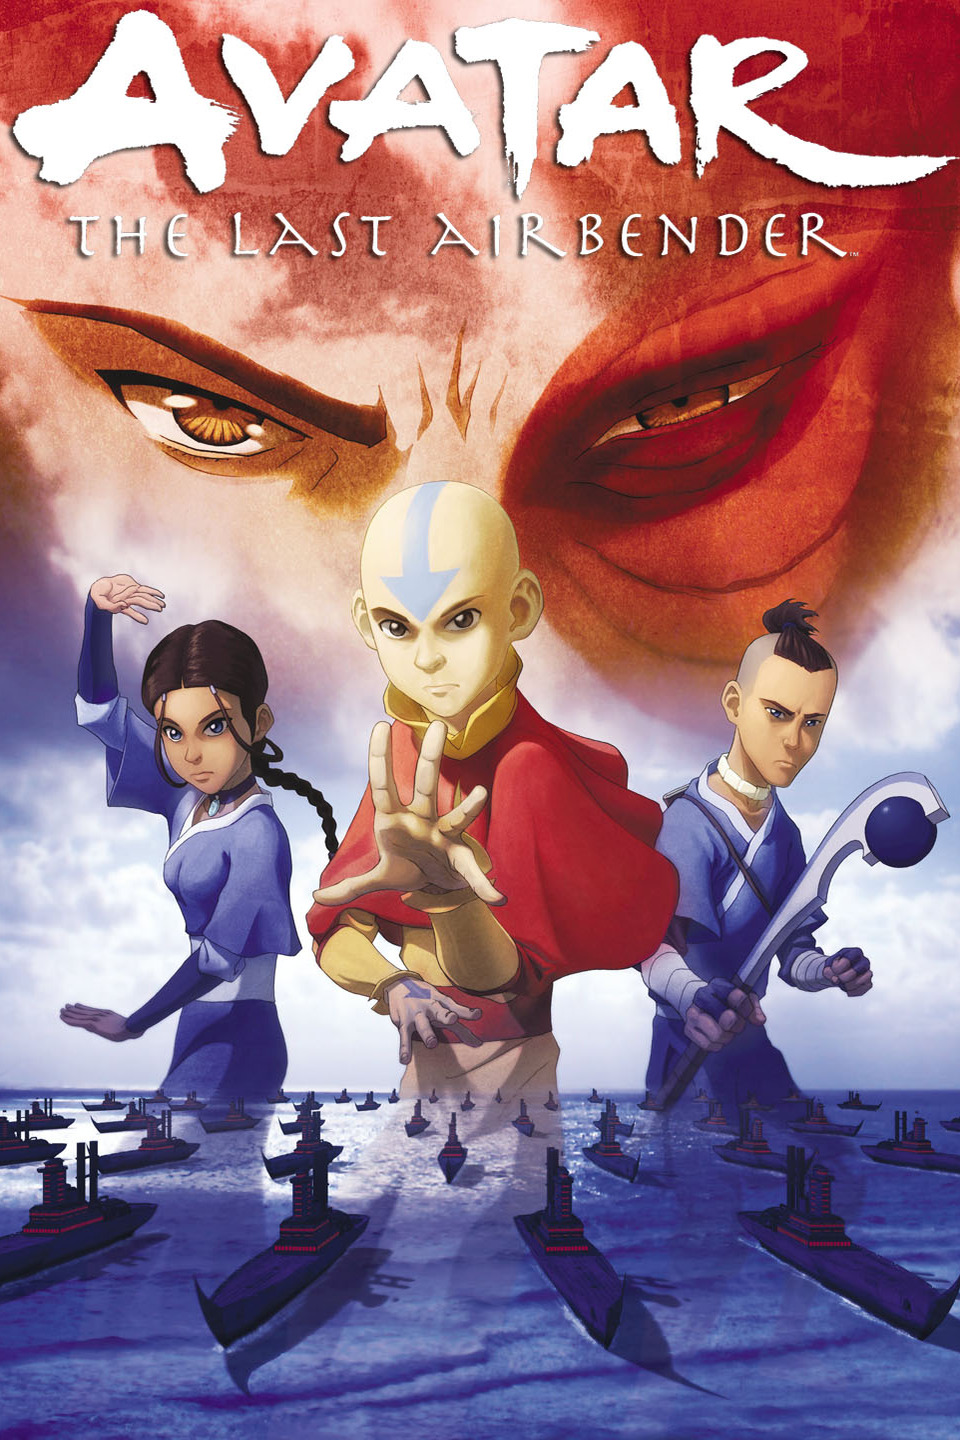 Avatar The Last Airbender Original Finale Plan Would Have Been a  Disastrous Ending